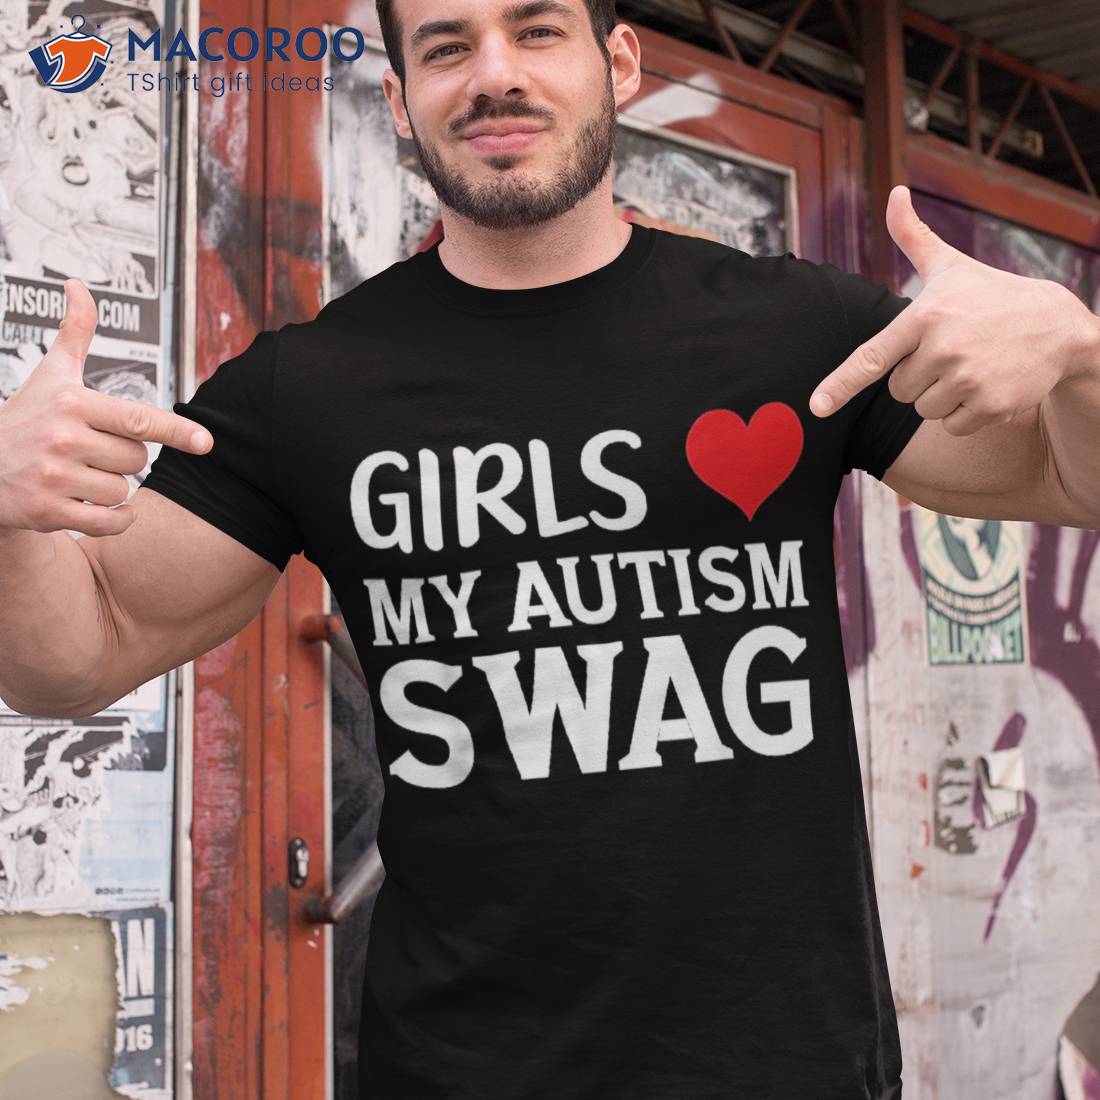 Girls Love My Swag T-shirts Man Cotton O-neck Short Sleeve Funny